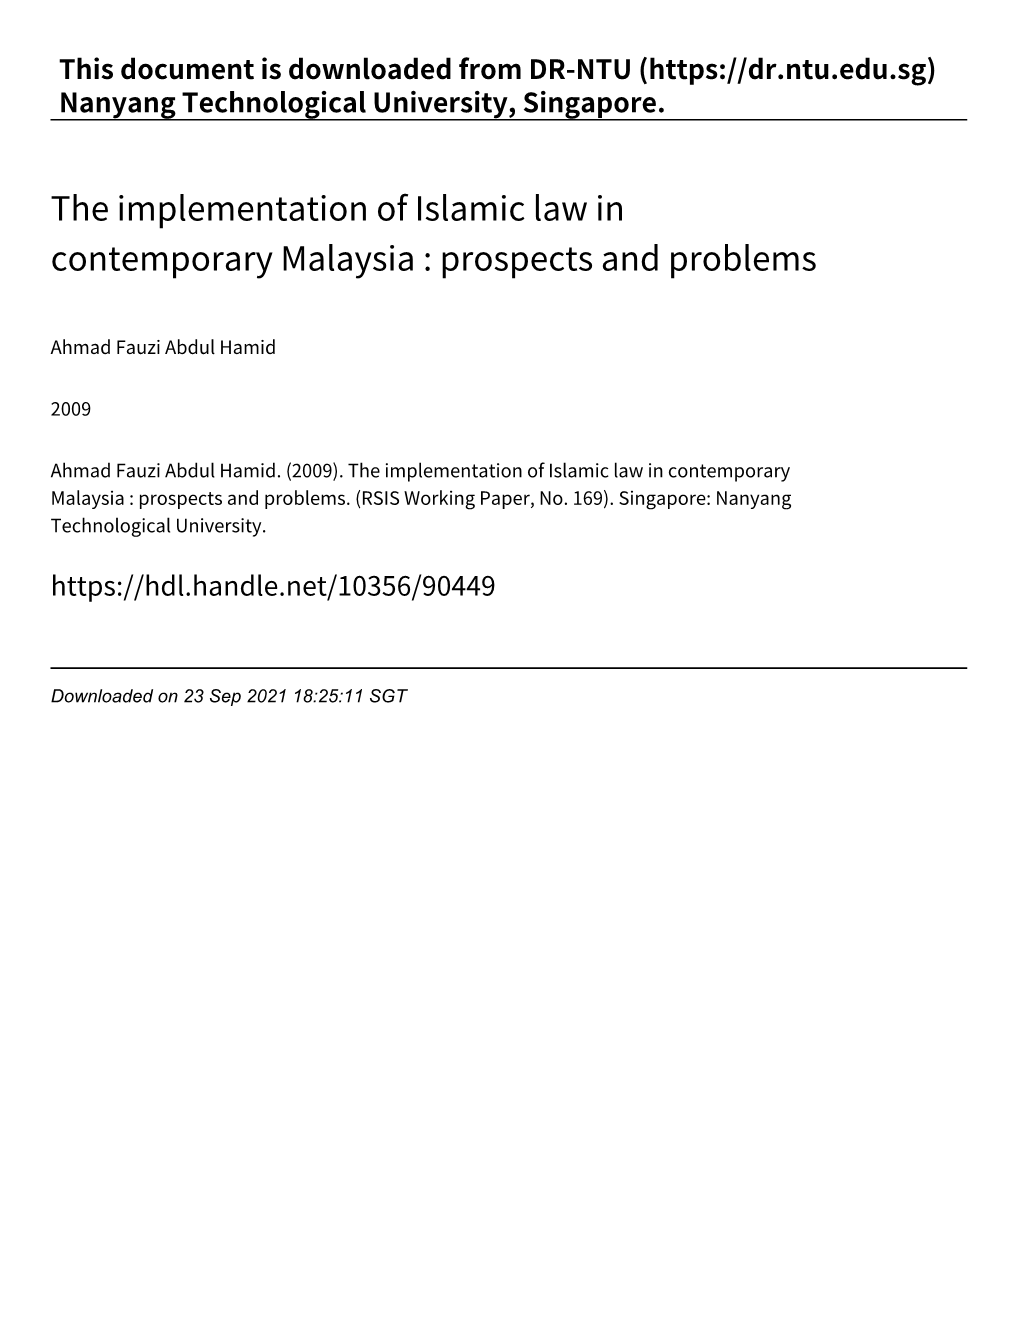 The Implementation of Islamic Law in Contemporary Malaysia : Prospects and Problems